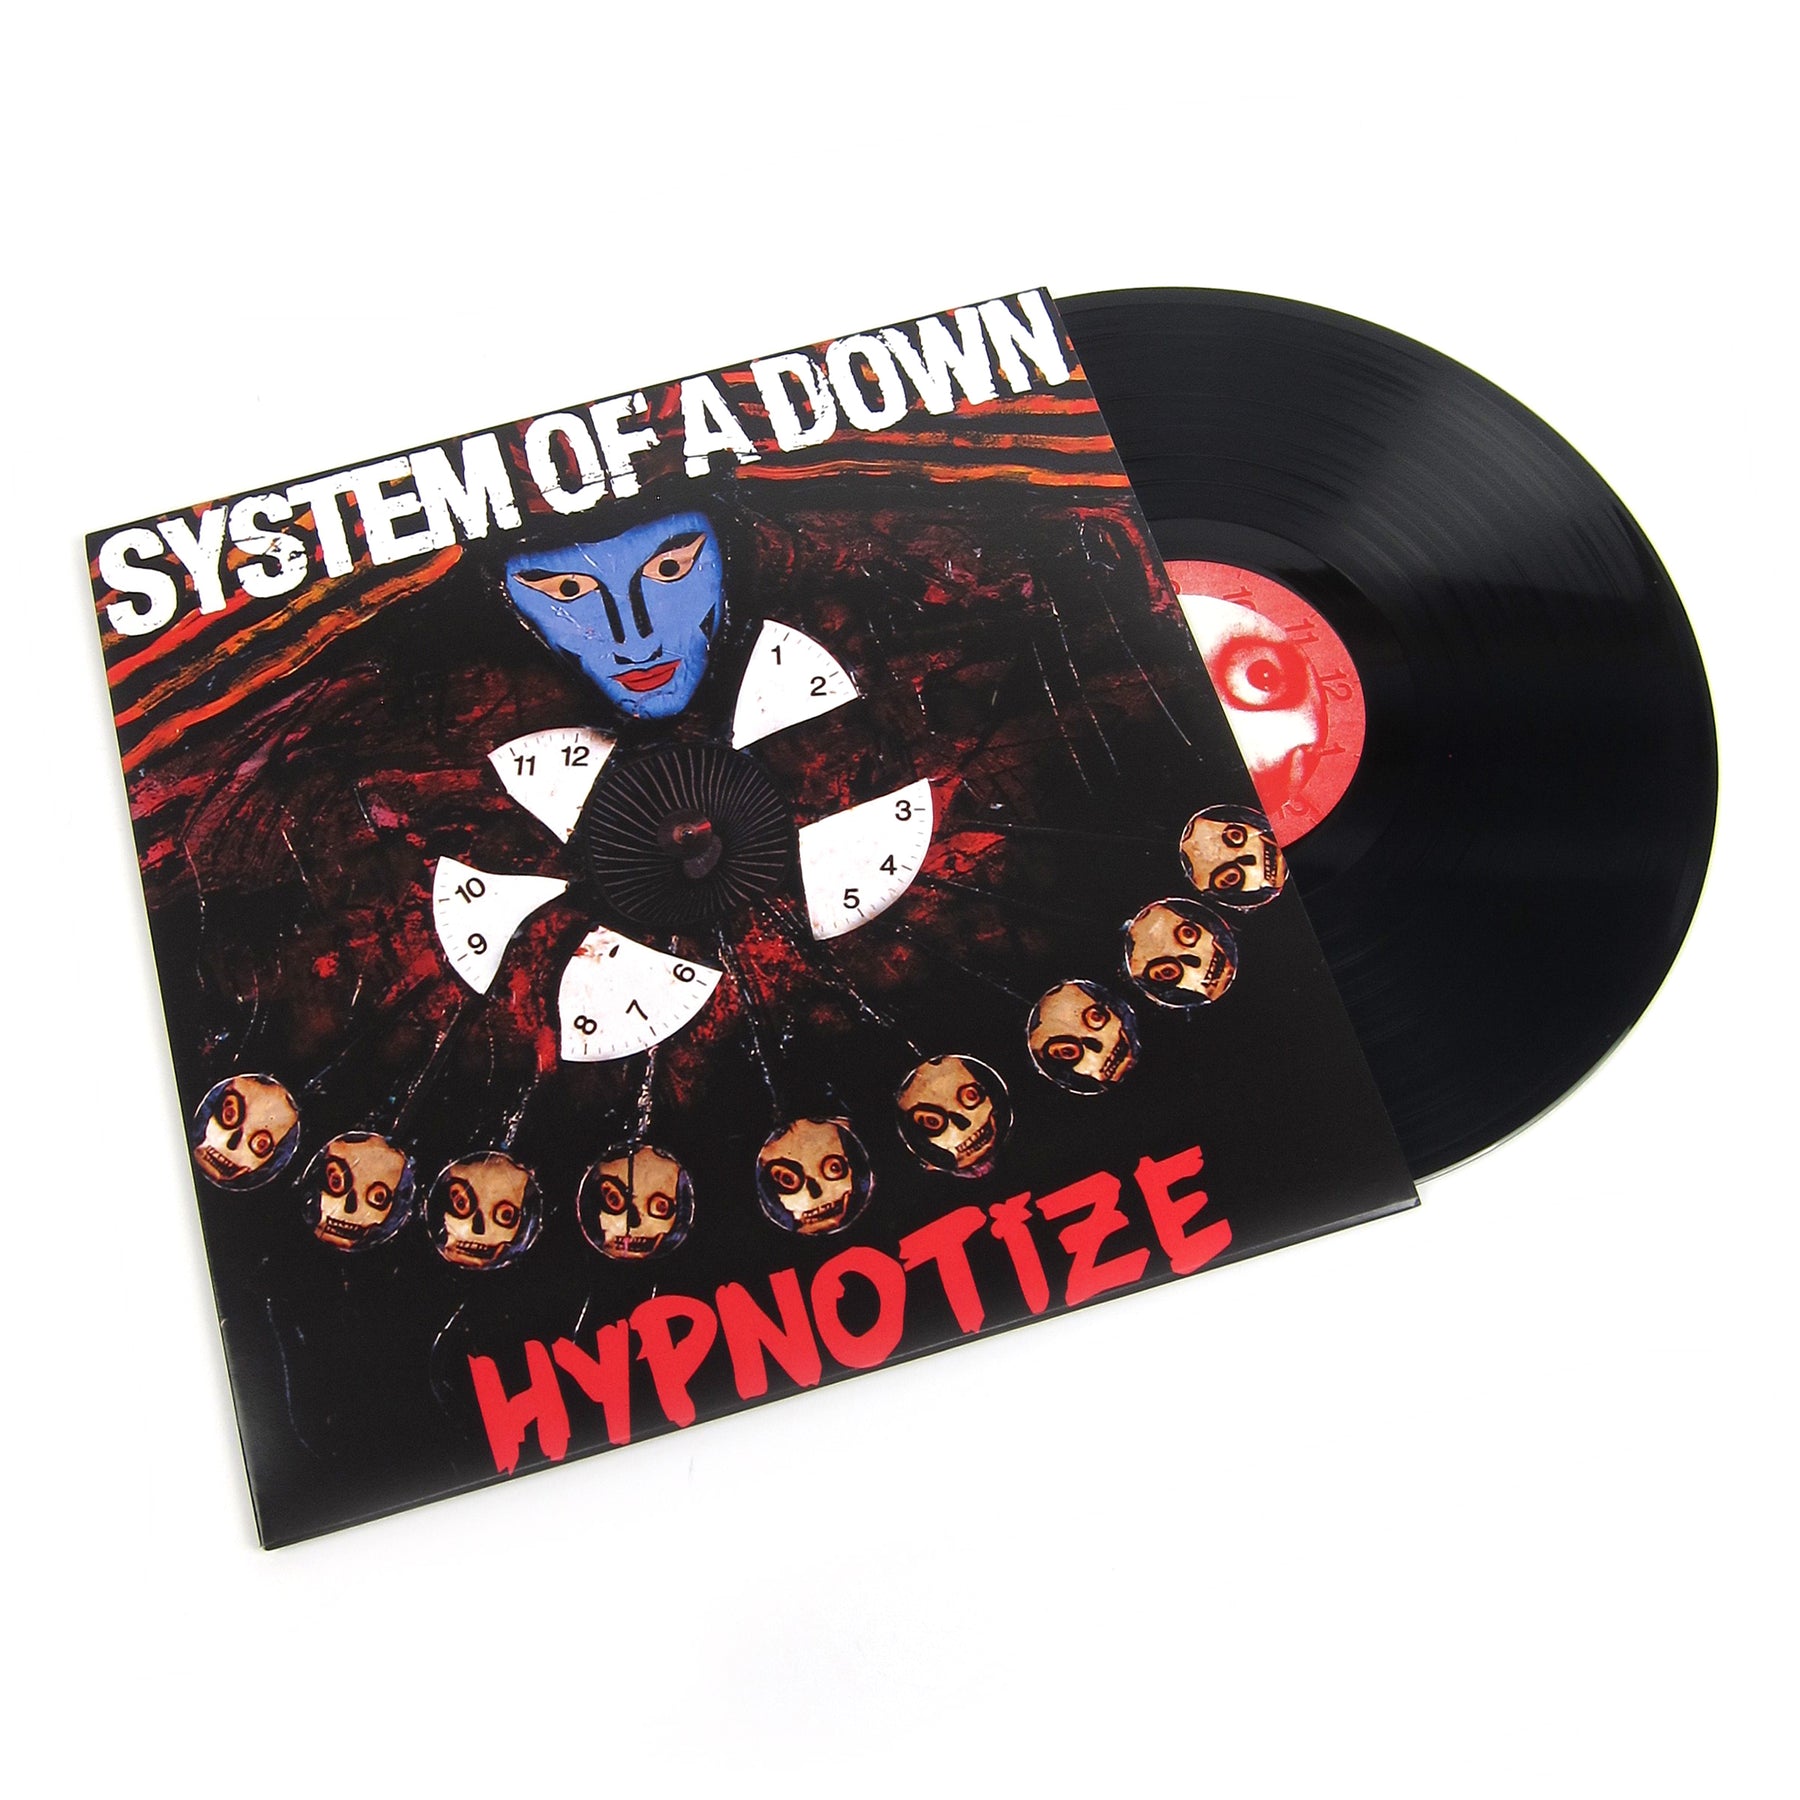 meaning of hypnotize system of a down